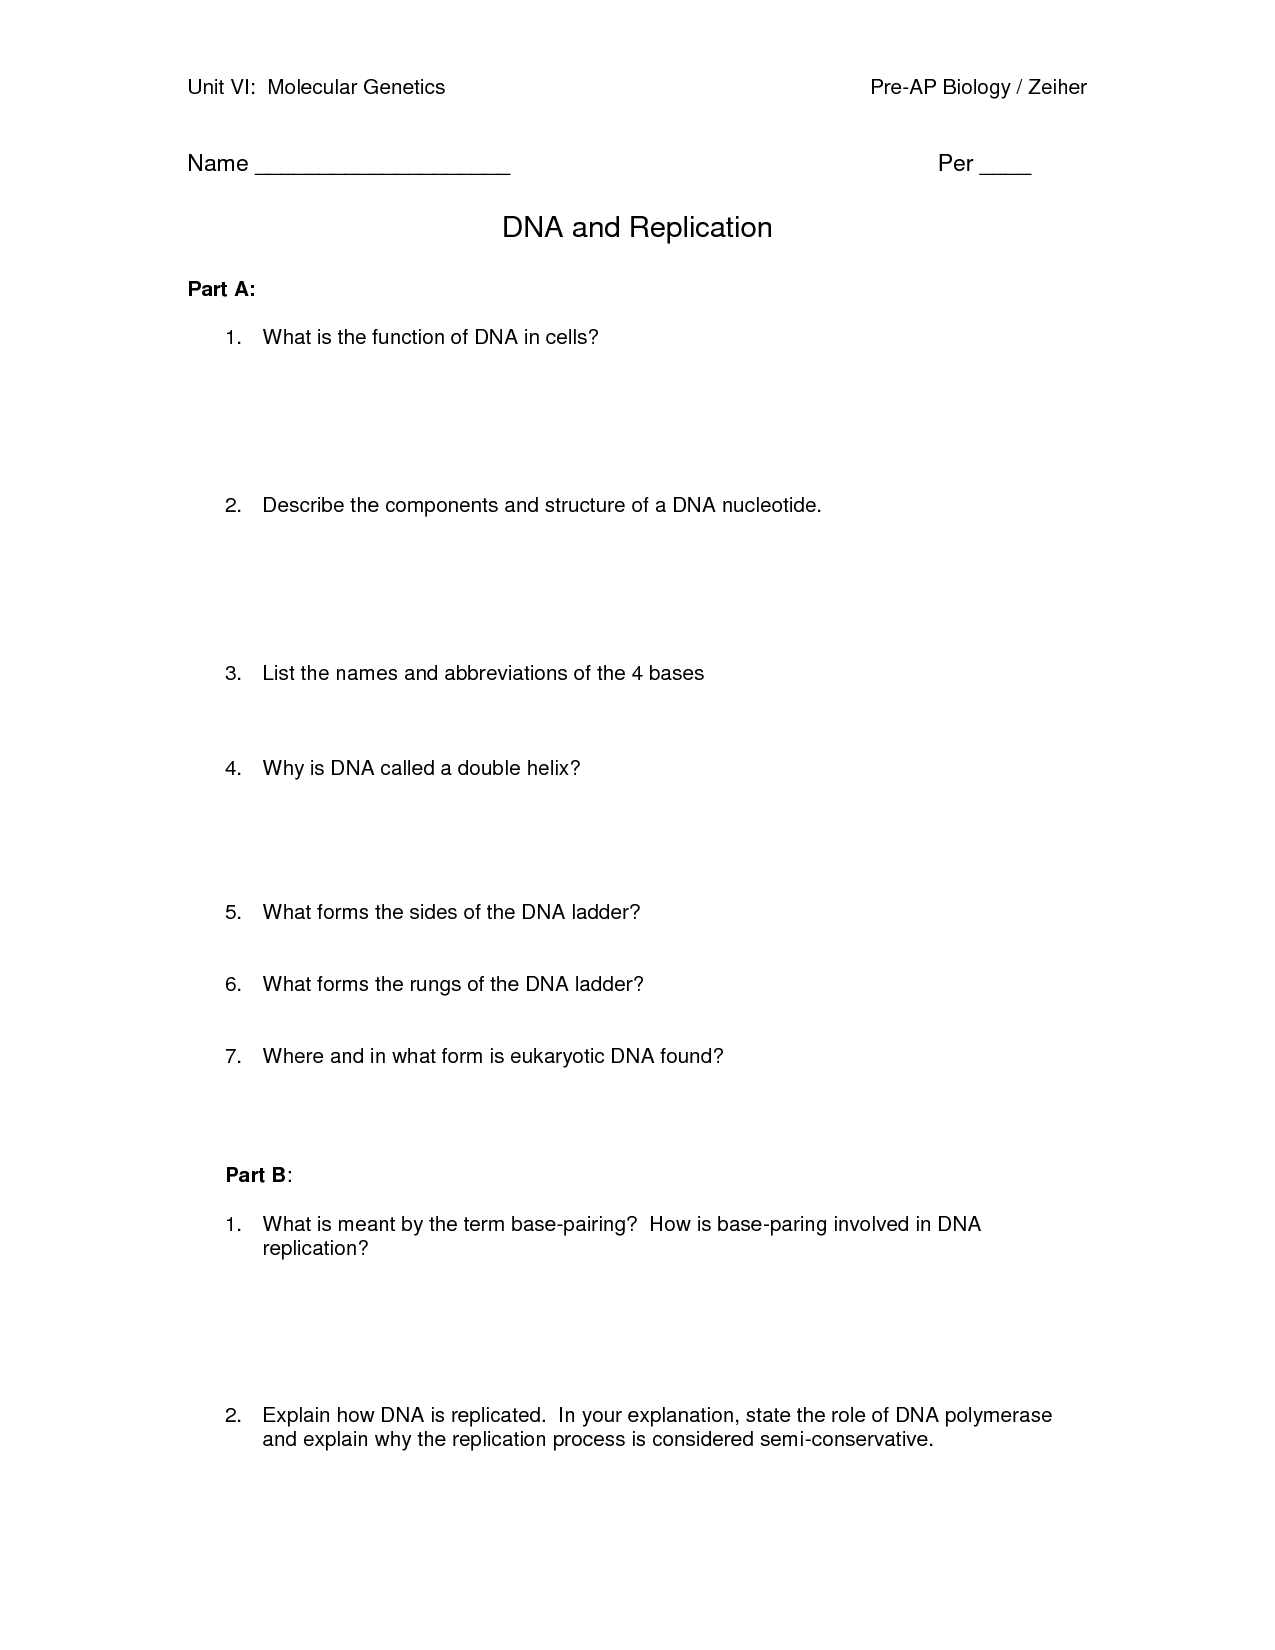 DNA Structure and Replication Worksheet